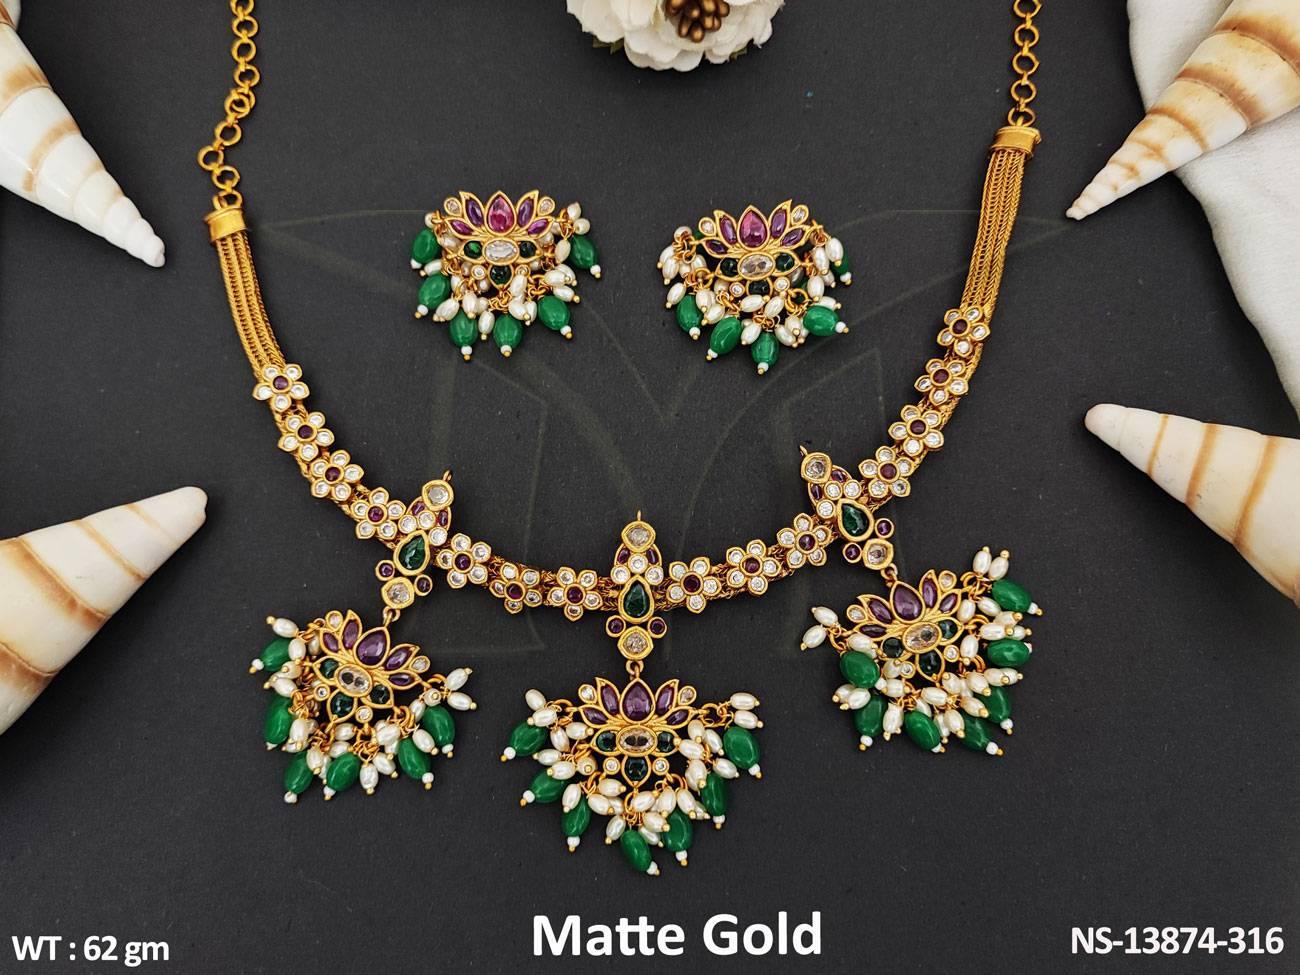 The necklace set is sure to make a statement with its stylish, timeless aesthetic.